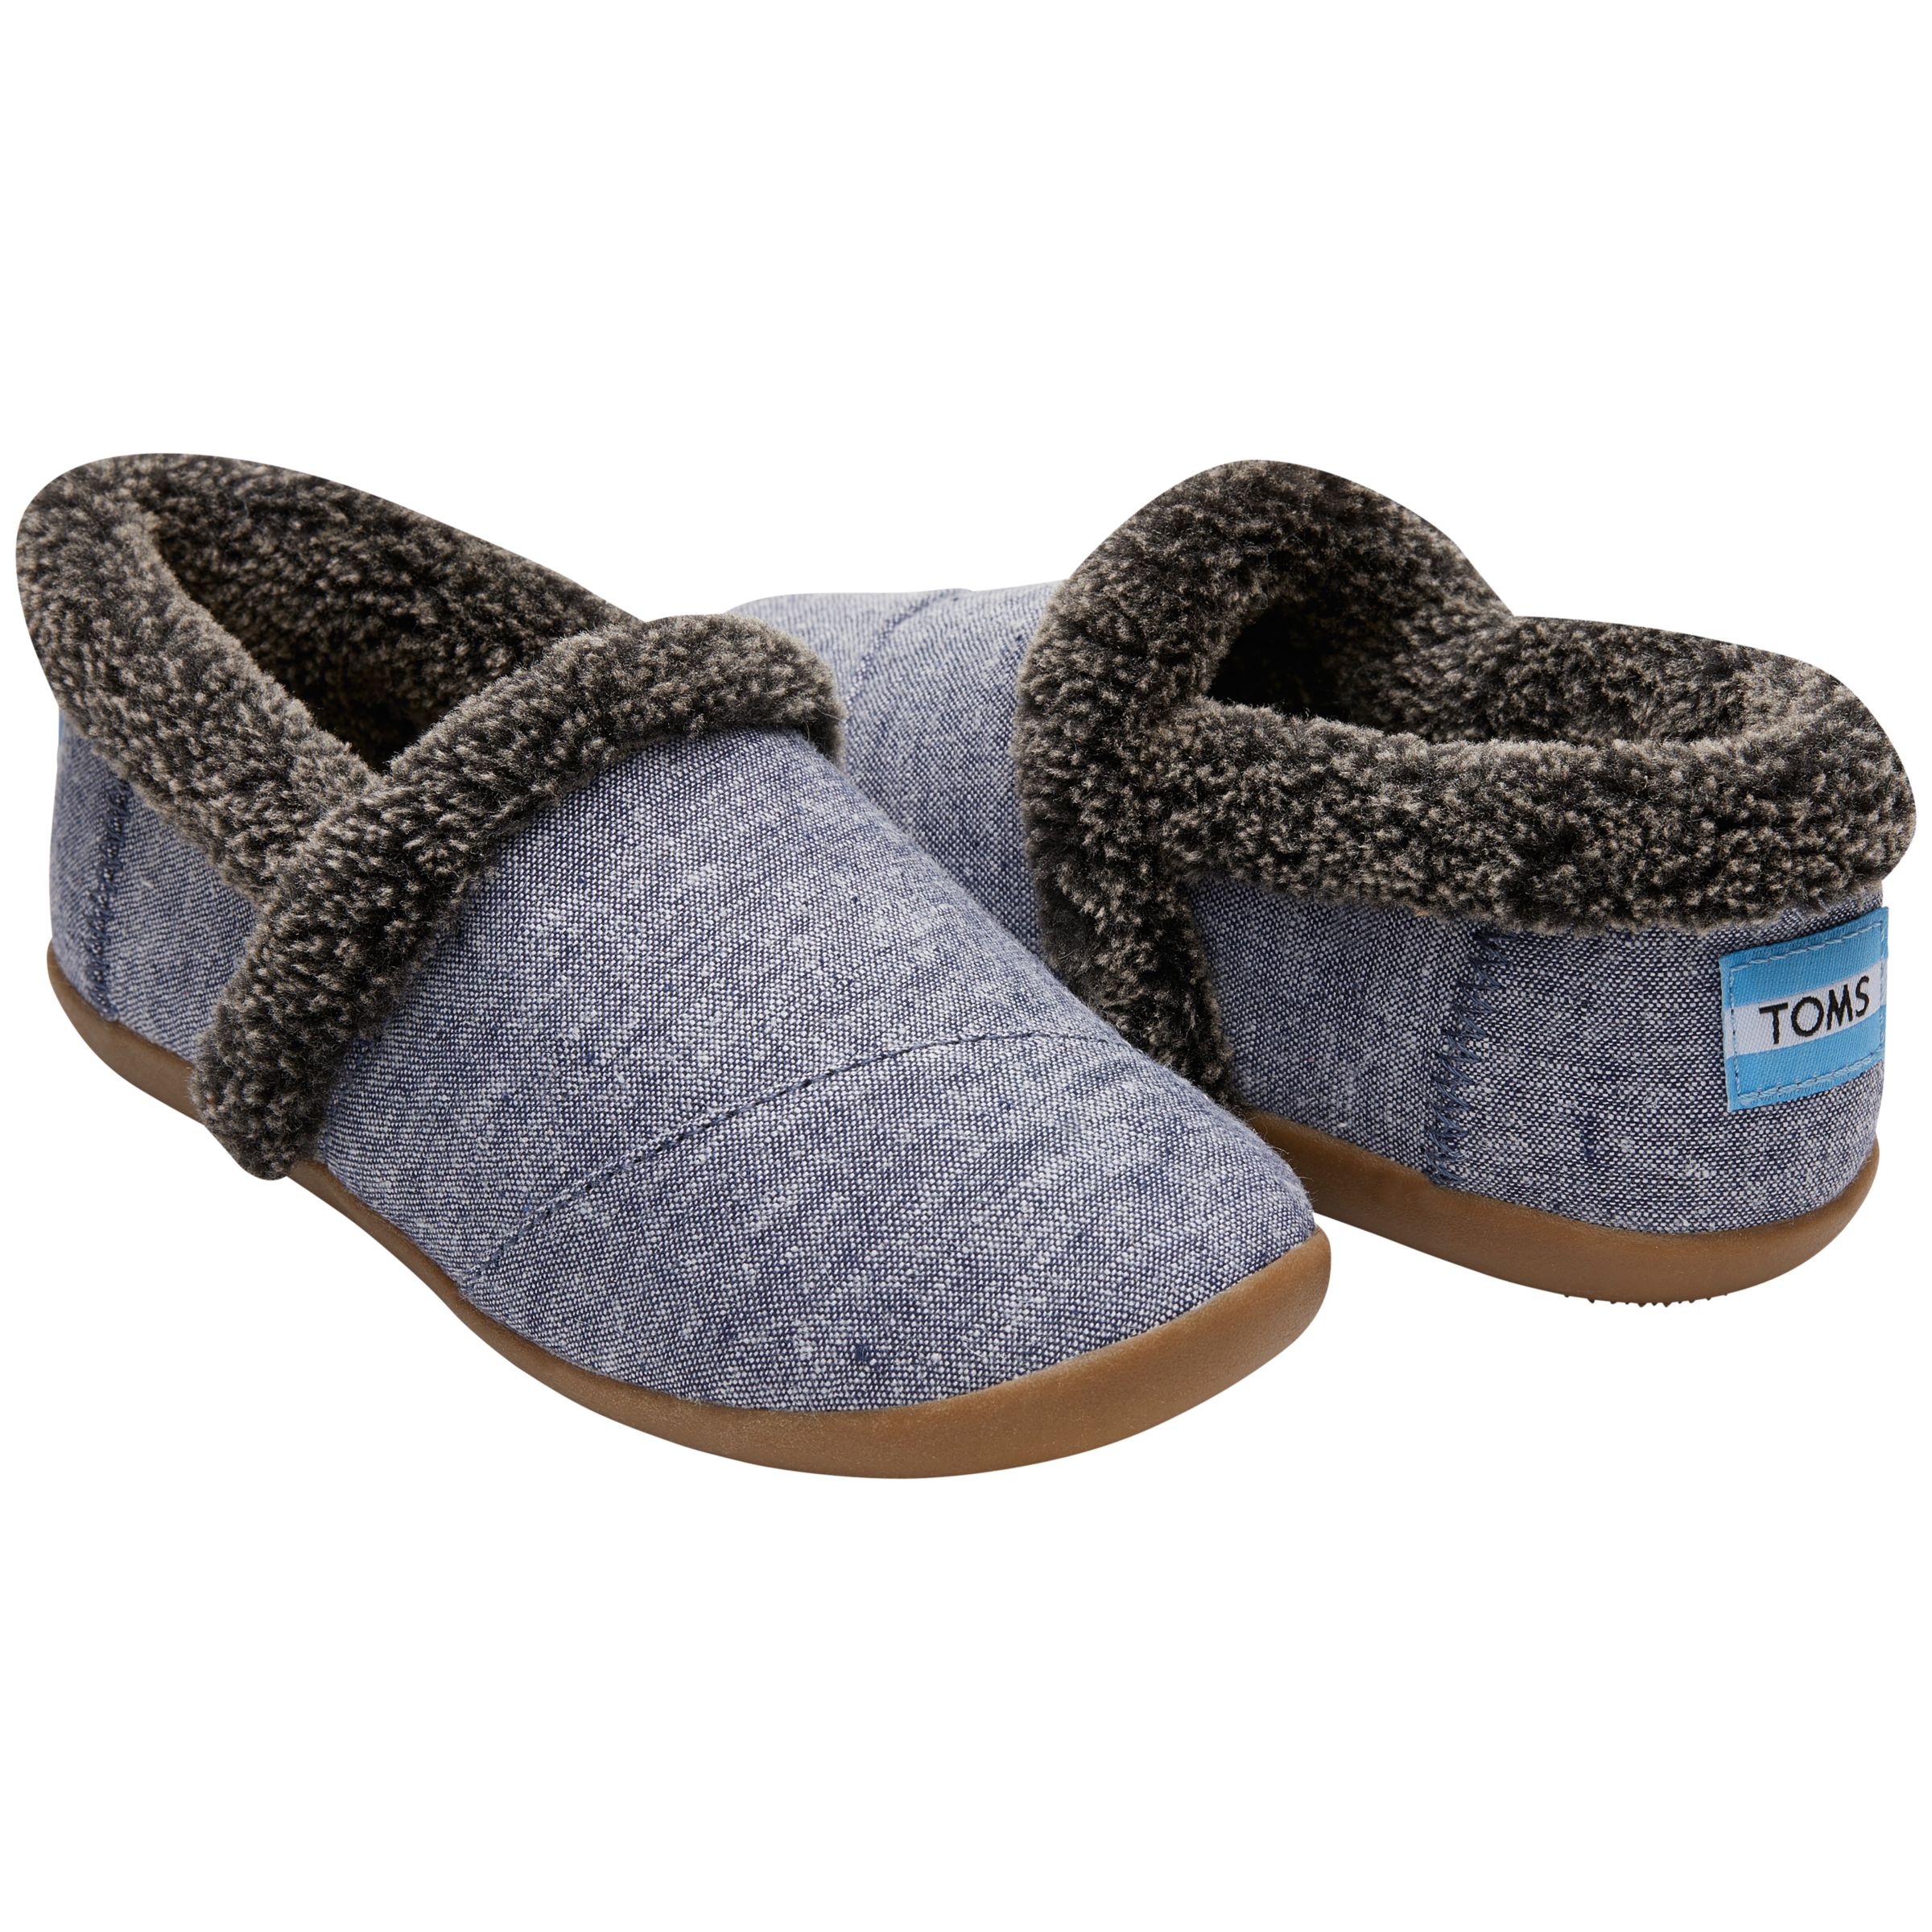 TOMS House Slippers, Chambray, 9 Jnr